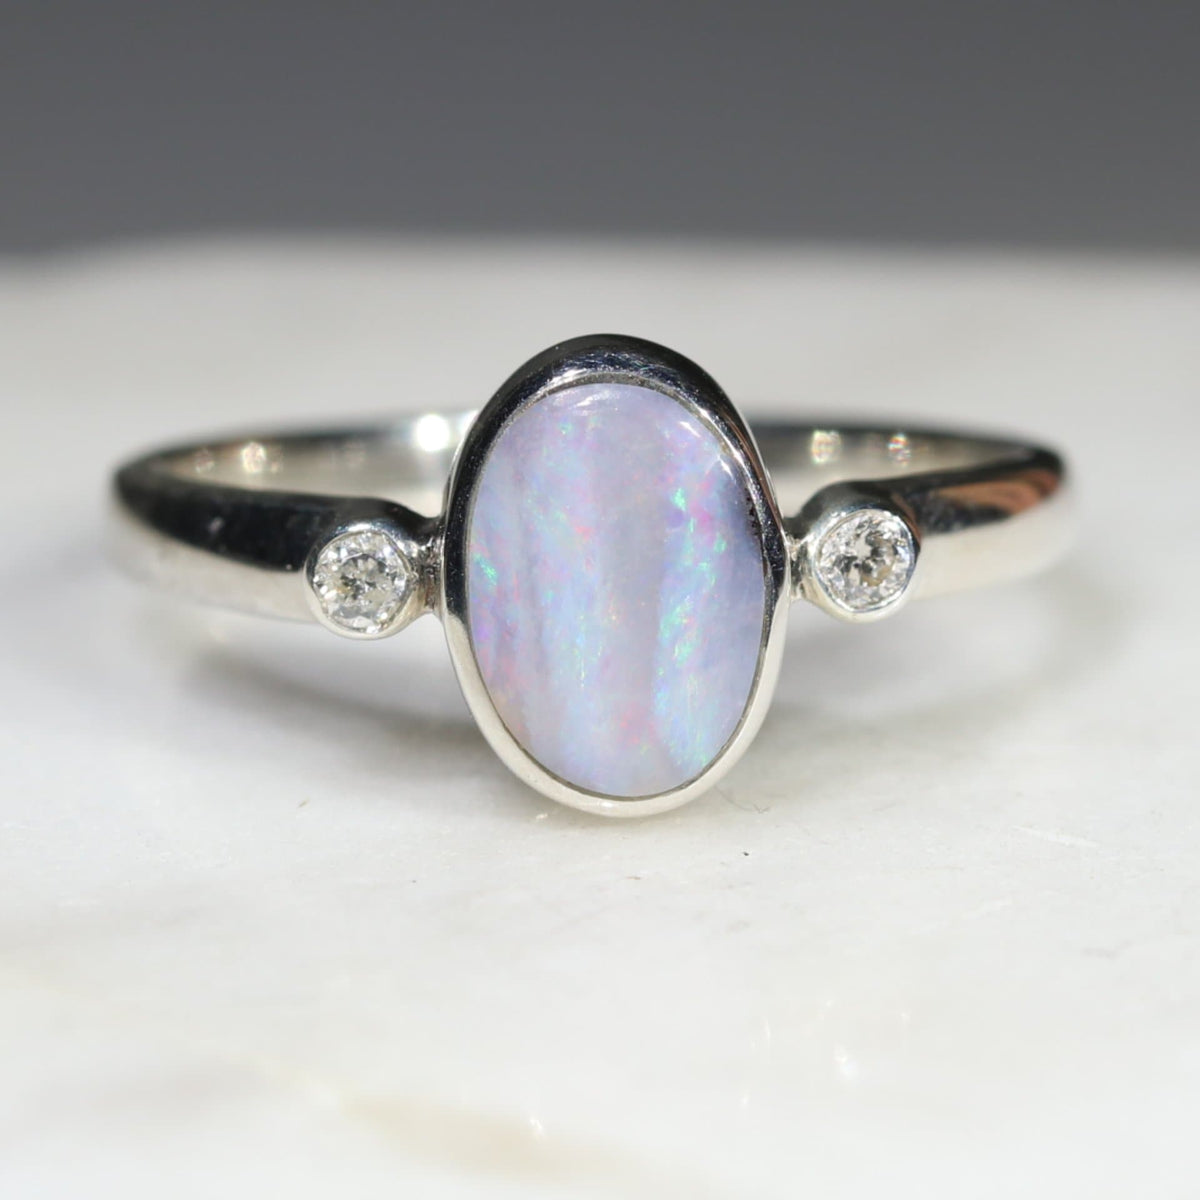 Boulder Opal Silver Ring and Diamonds - Size 6.5